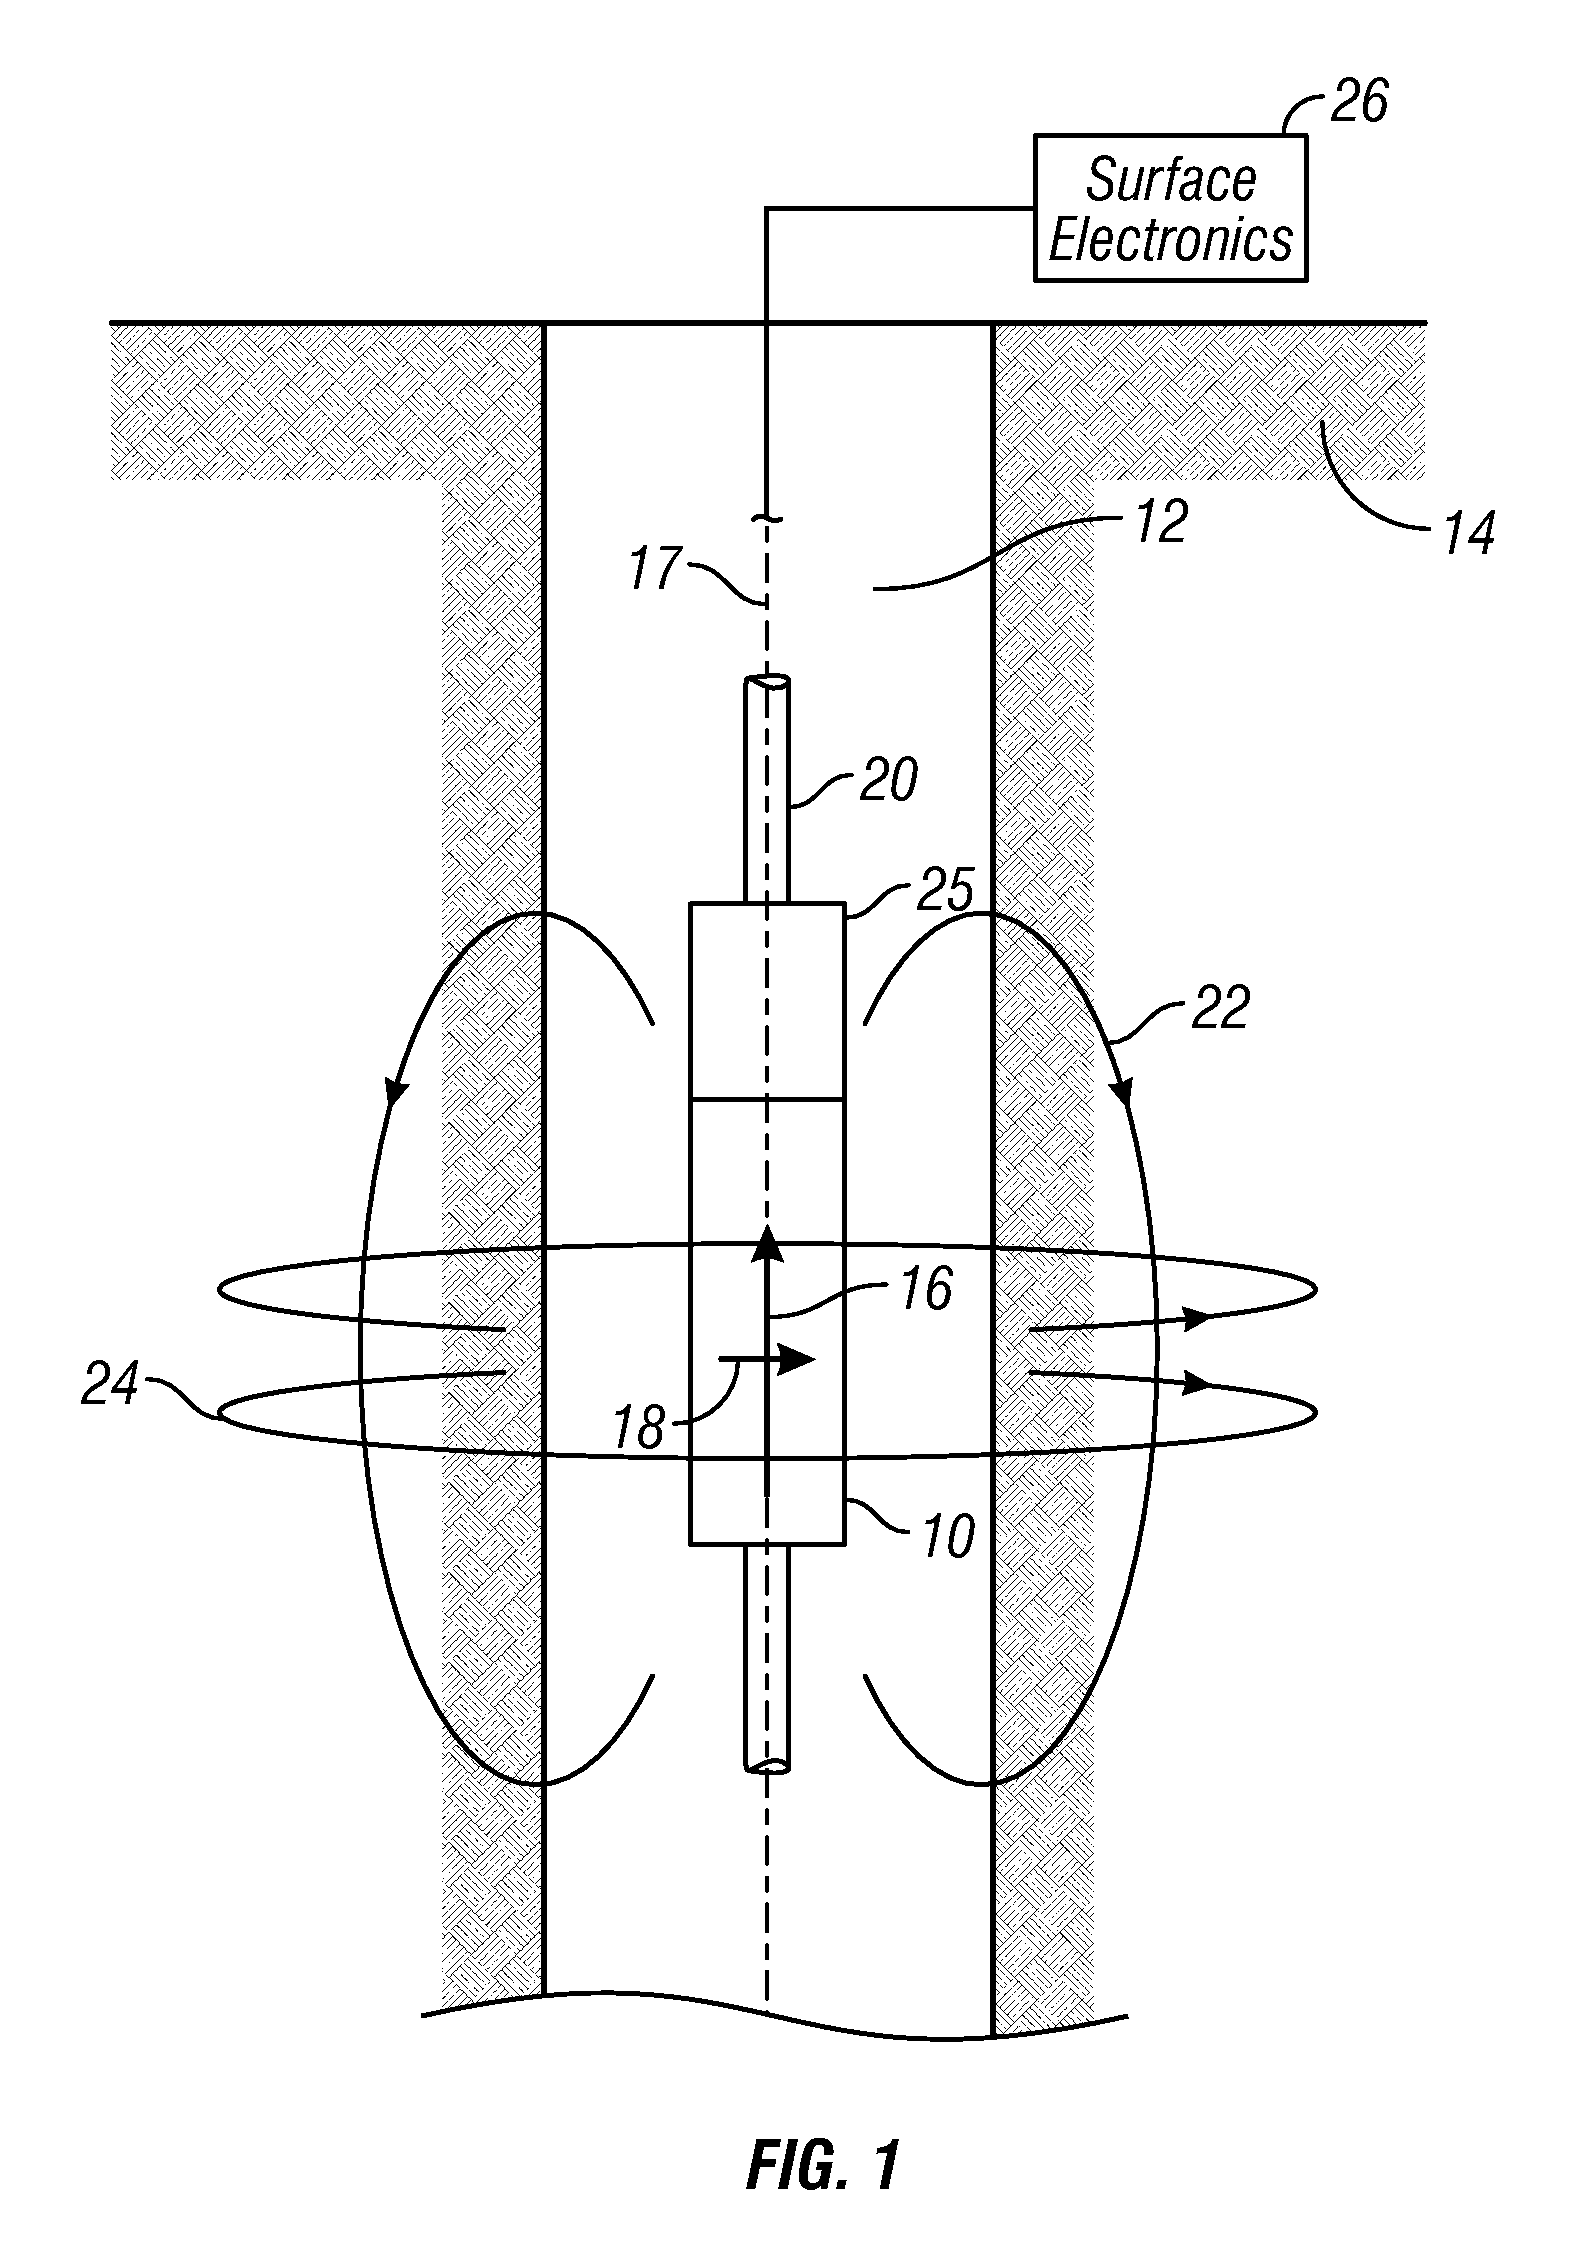 Nuclear magnetic resonance tool using switchable source of static magnetic field